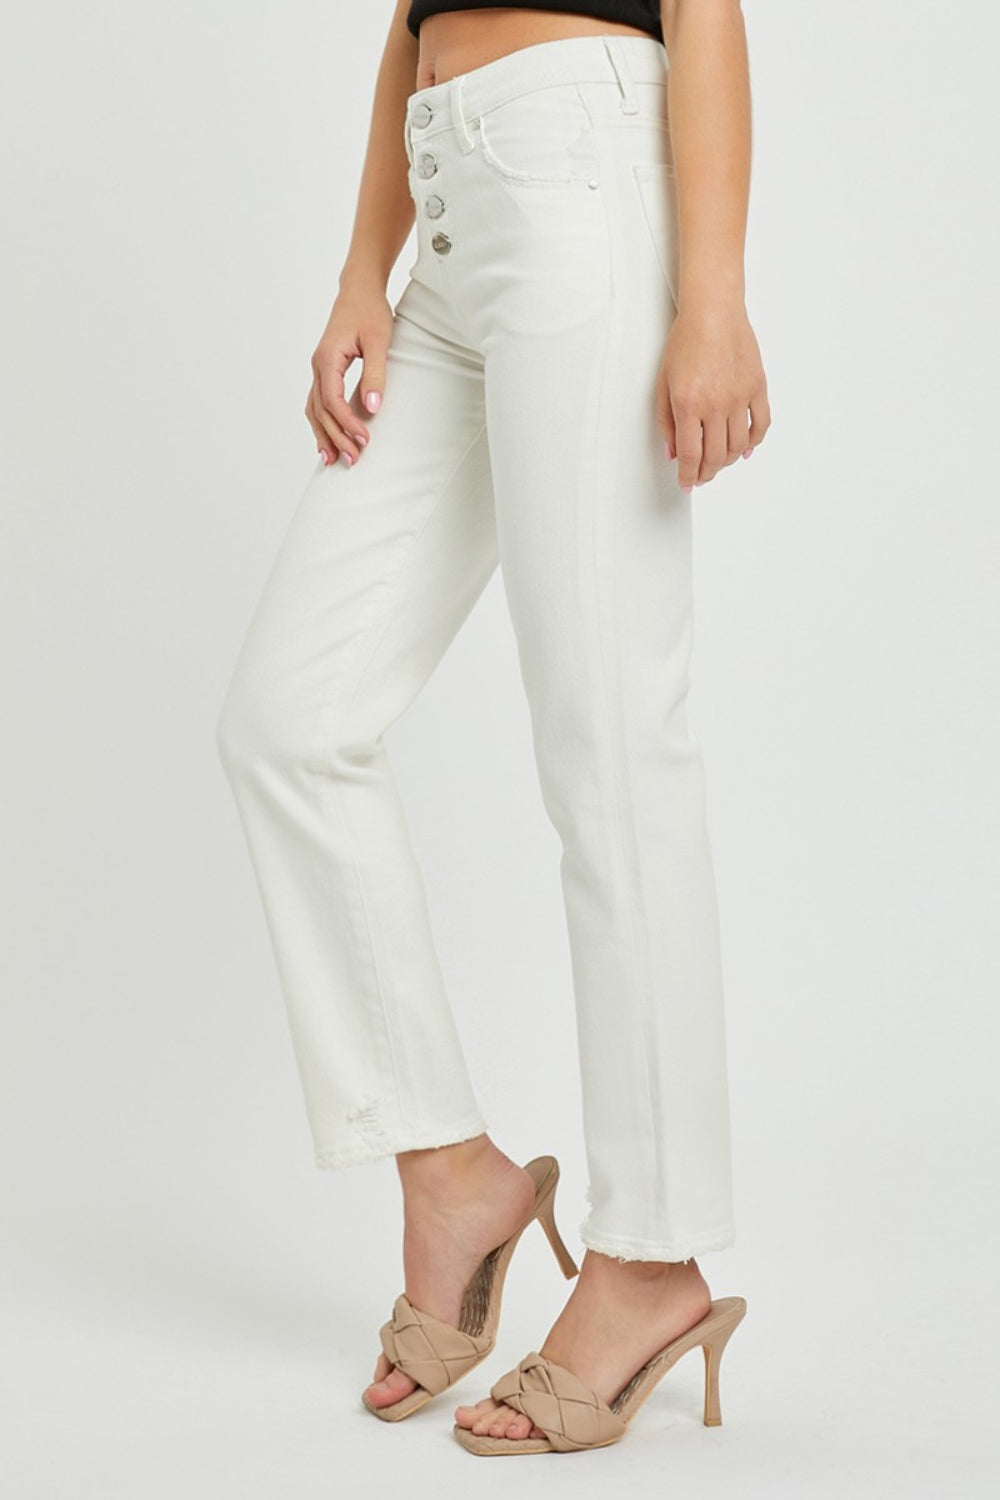 ONLINE ONLY! RISEN Full Size Mid-Rise Tummy Control Straight Jeans